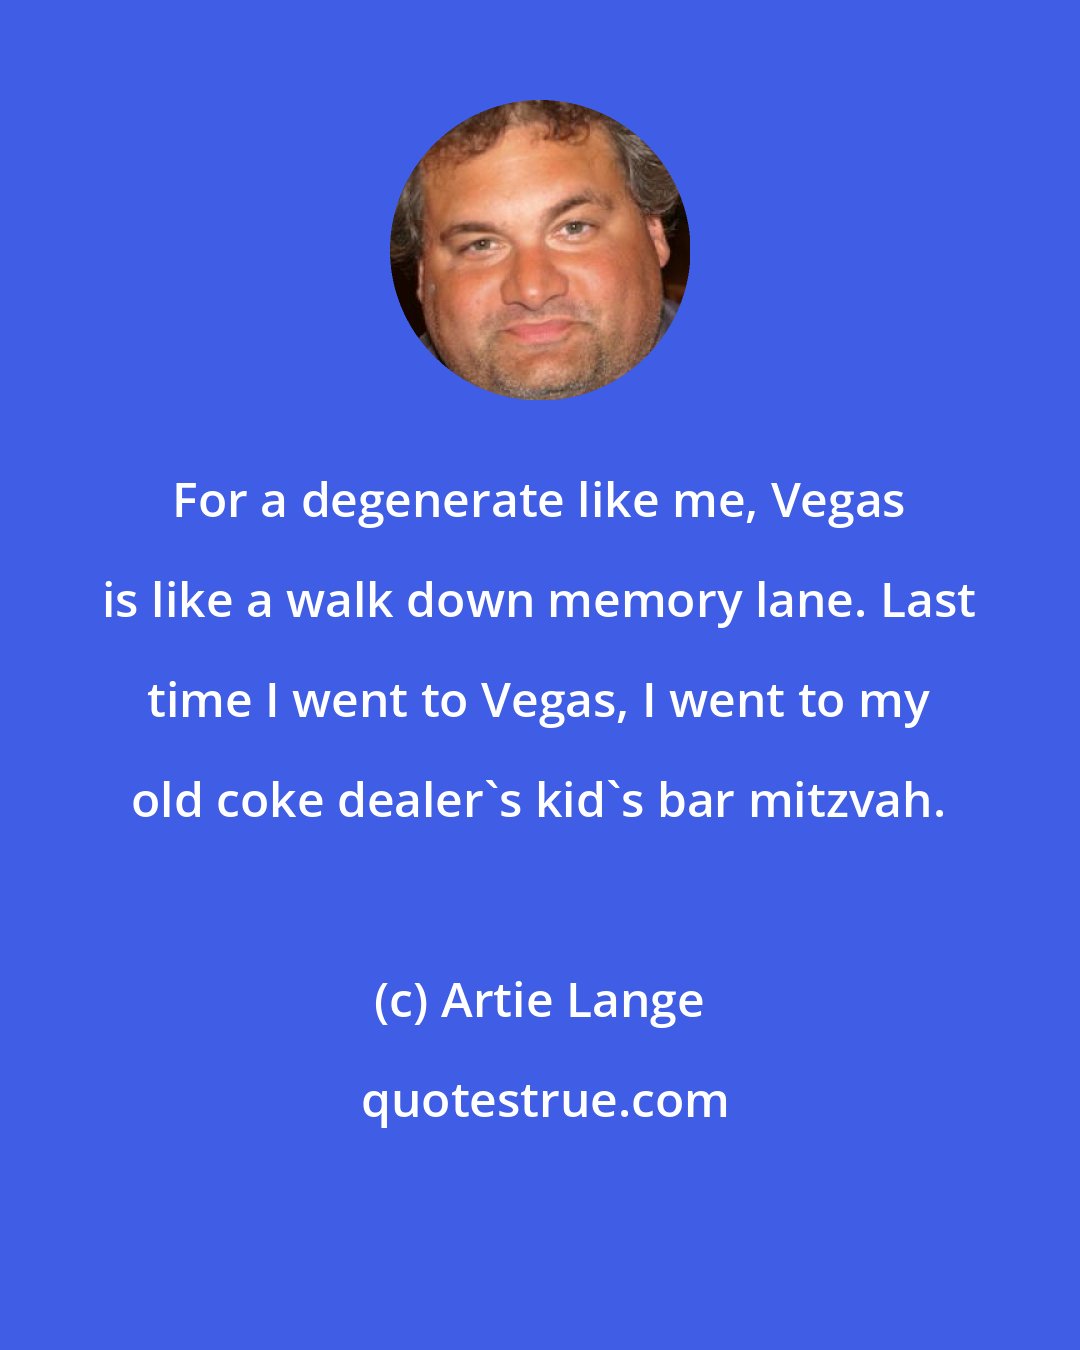 Artie Lange: For a degenerate like me, Vegas is like a walk down memory lane. Last time I went to Vegas, I went to my old coke dealer's kid's bar mitzvah.